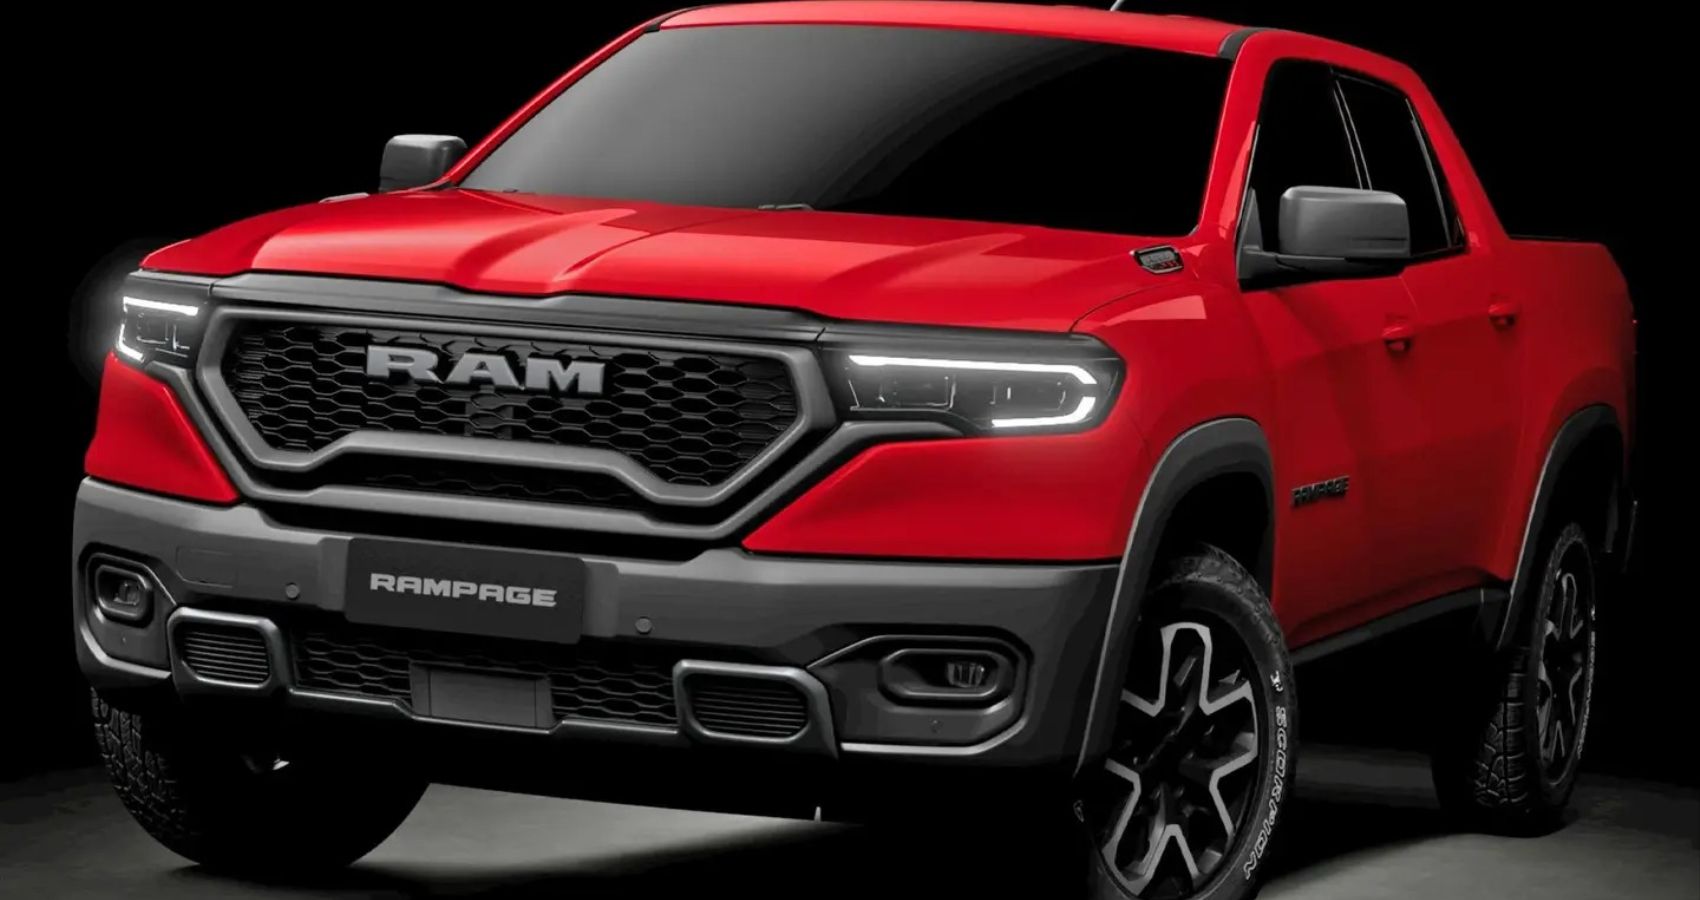 10 Ways The New Ram Rampage Will Reshape The Compact Pickup Truck Market